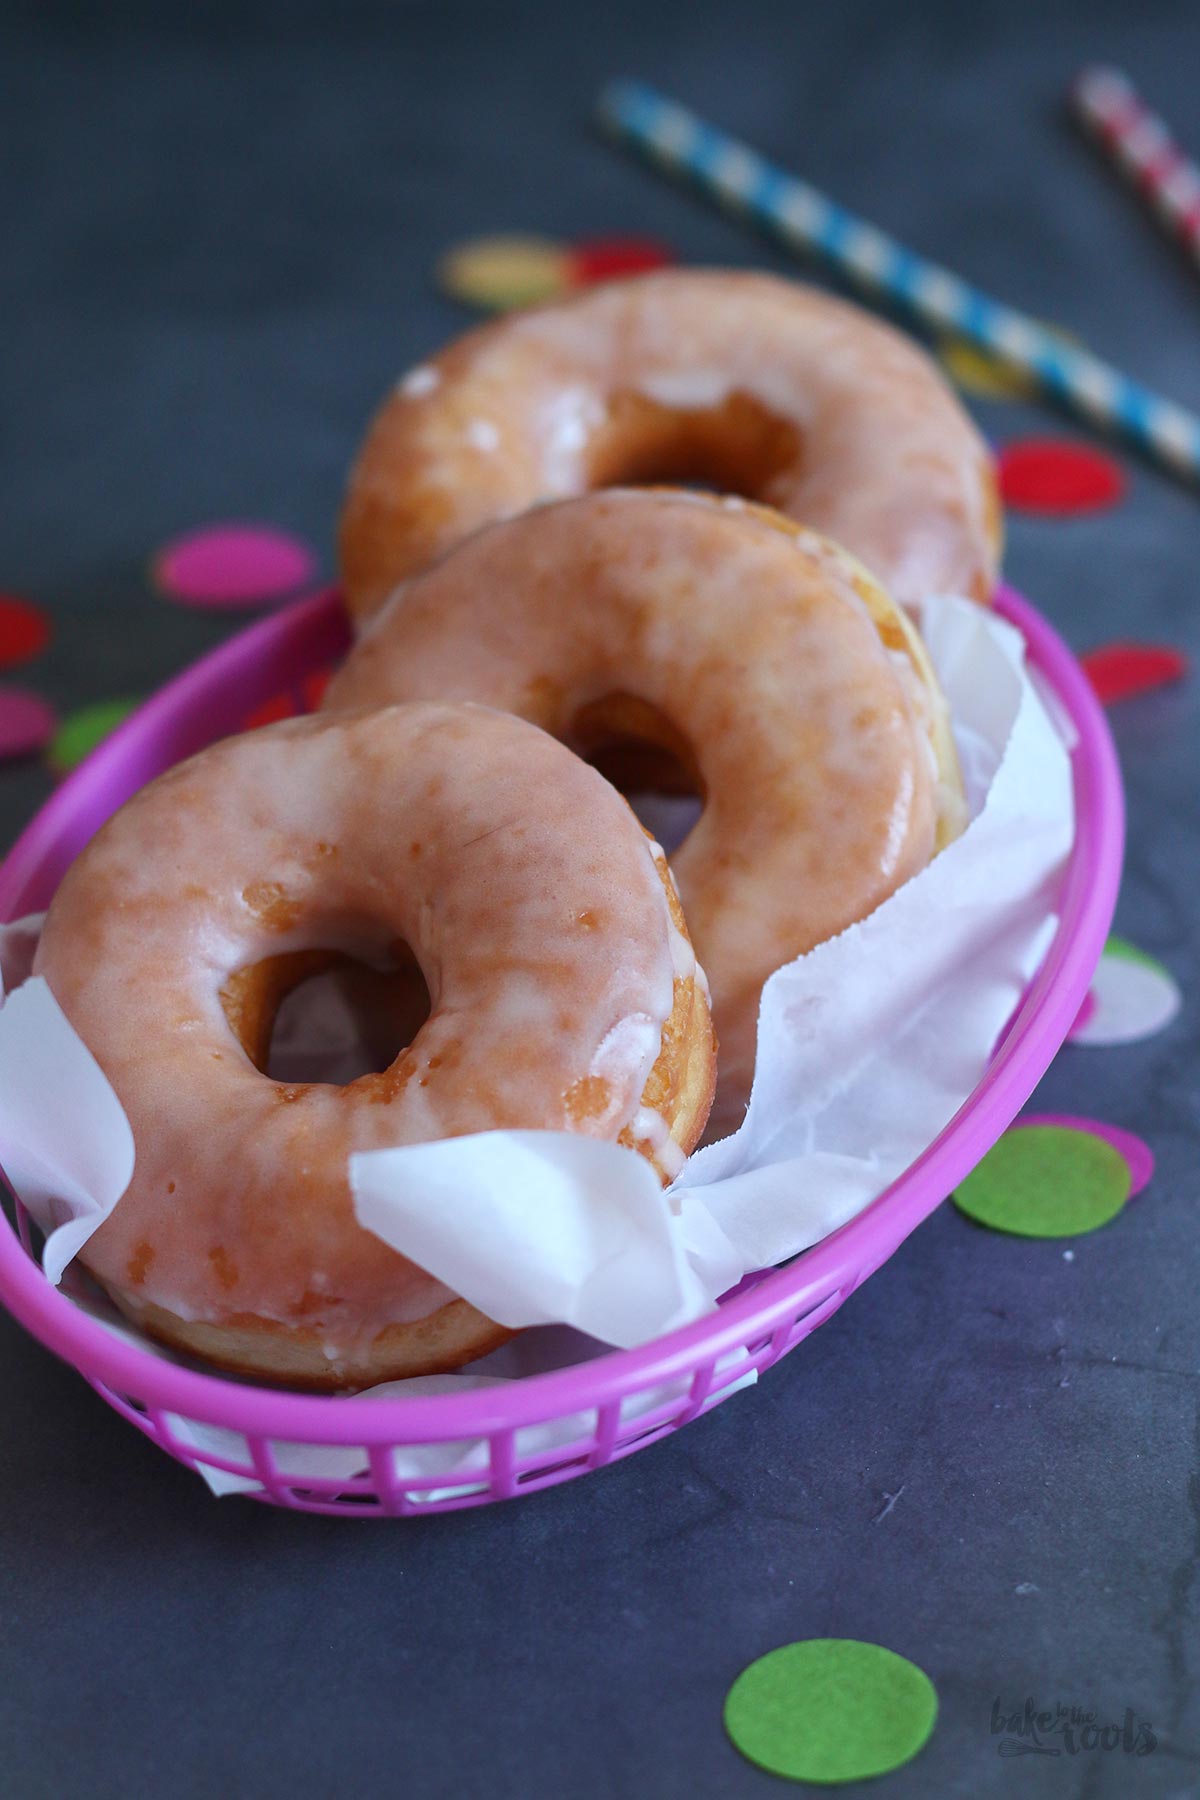 Glazed Donuts | Bake to the roots